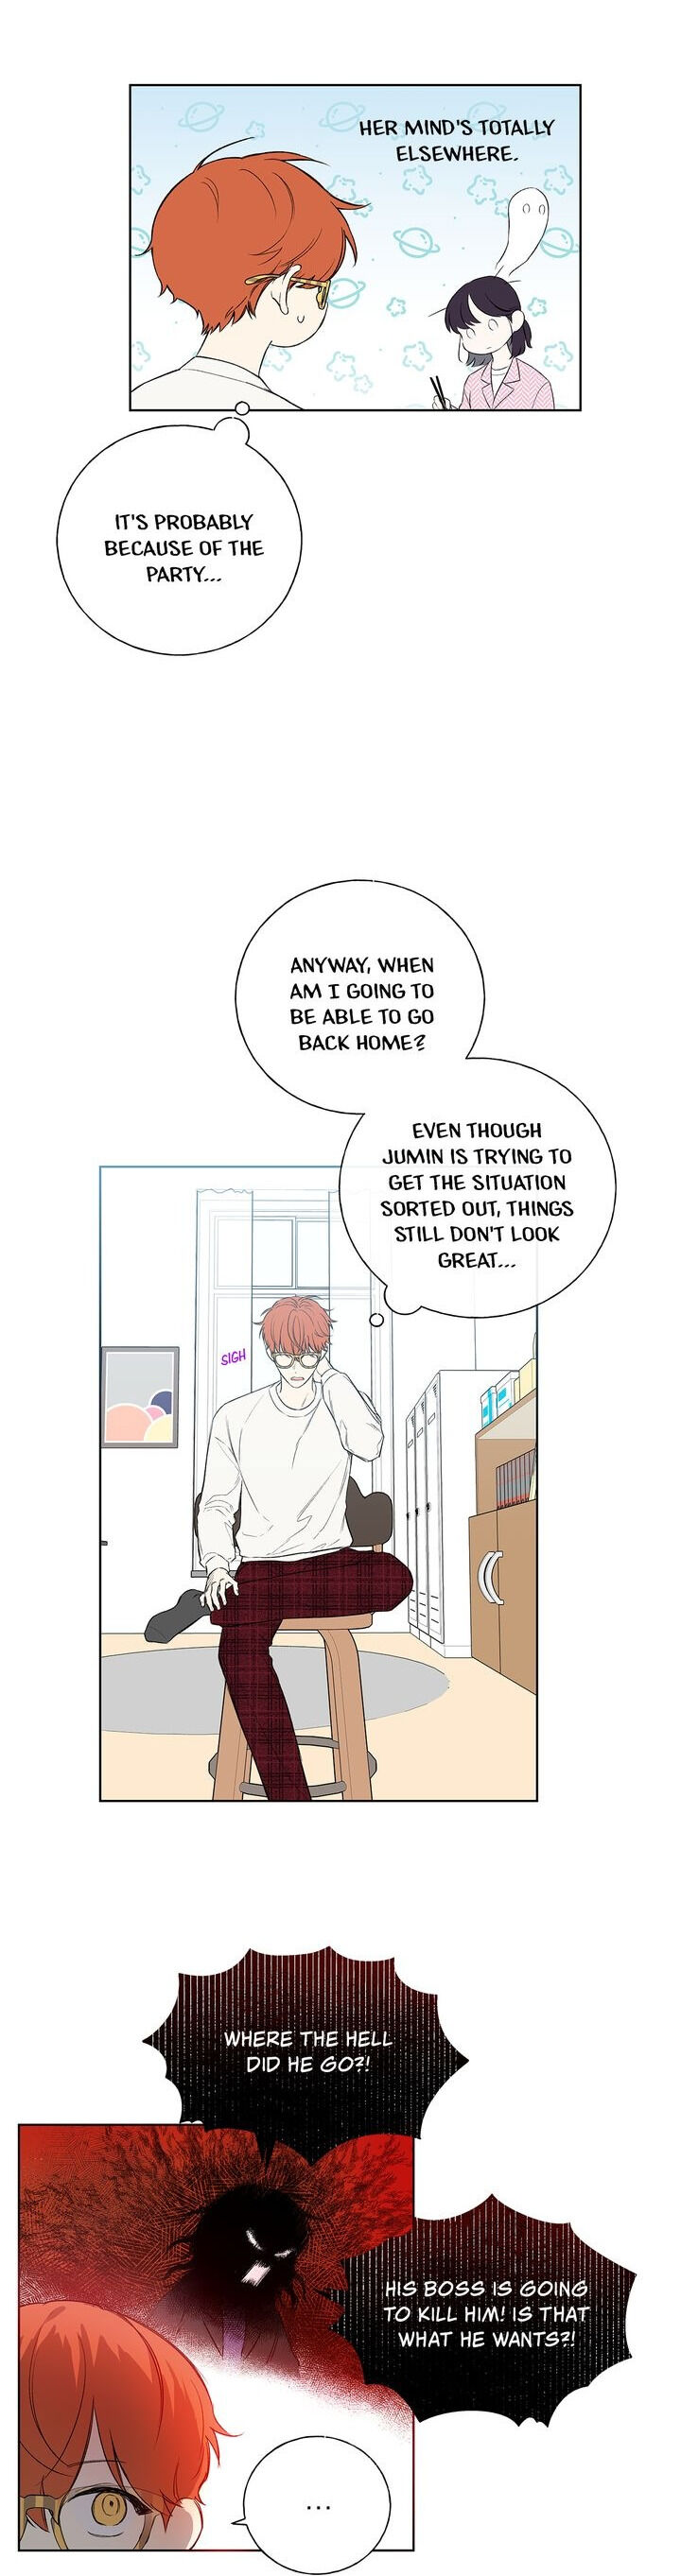 Invitation Of The Mystic Messenger - Page 3